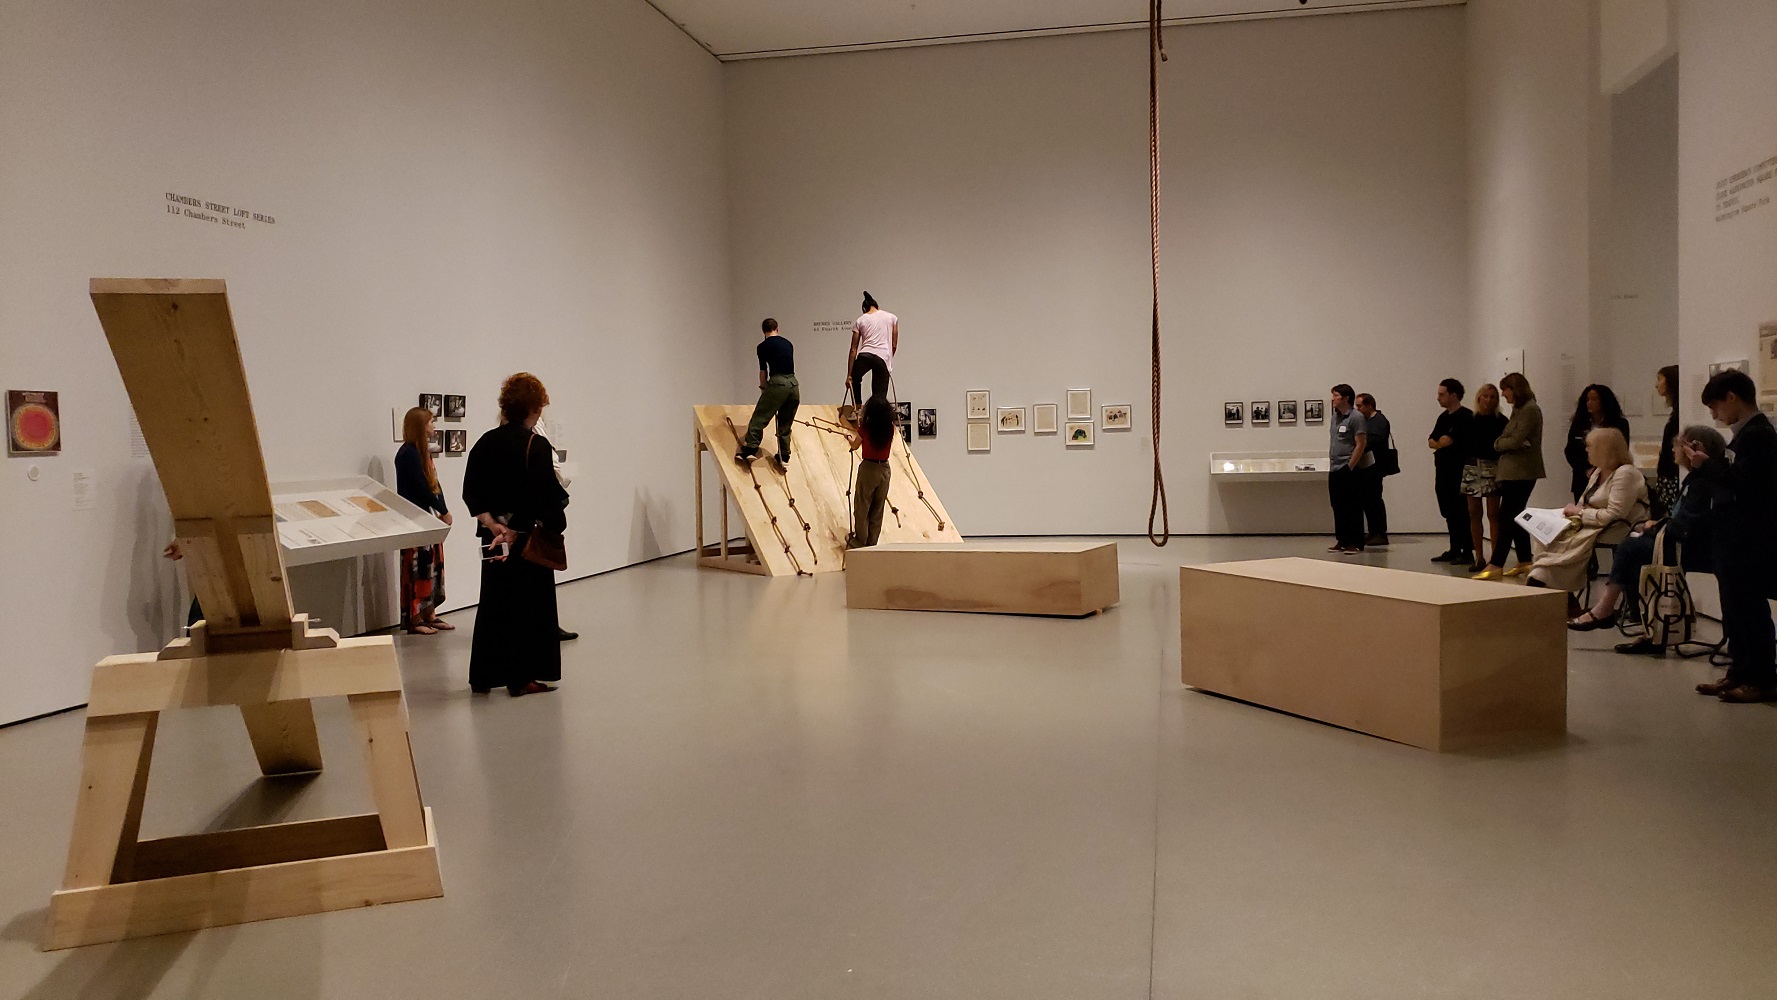 Judson Dance Theater: The Is Never Done at MoMA, New York | L.A. Dance Chronicle